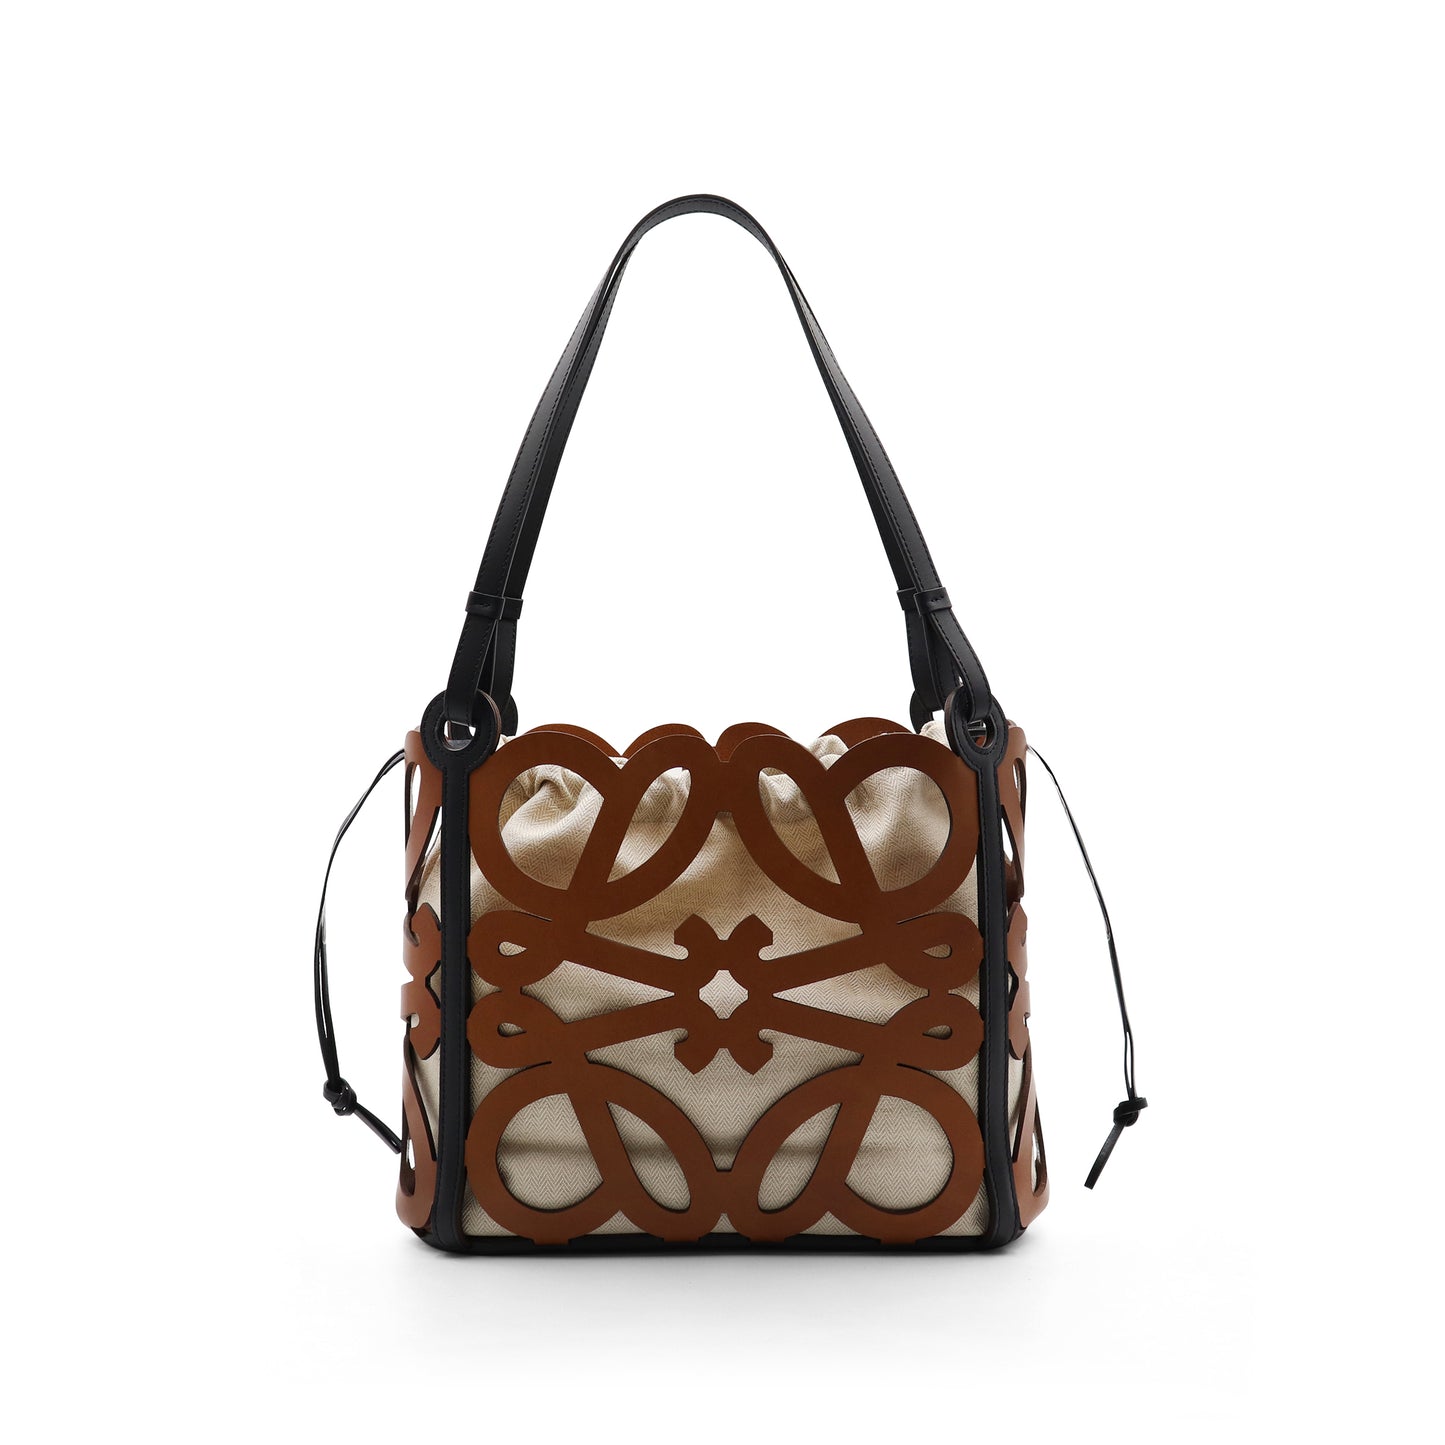 Small Anagram Cut Out Tote Bag in Calfskin in Tan